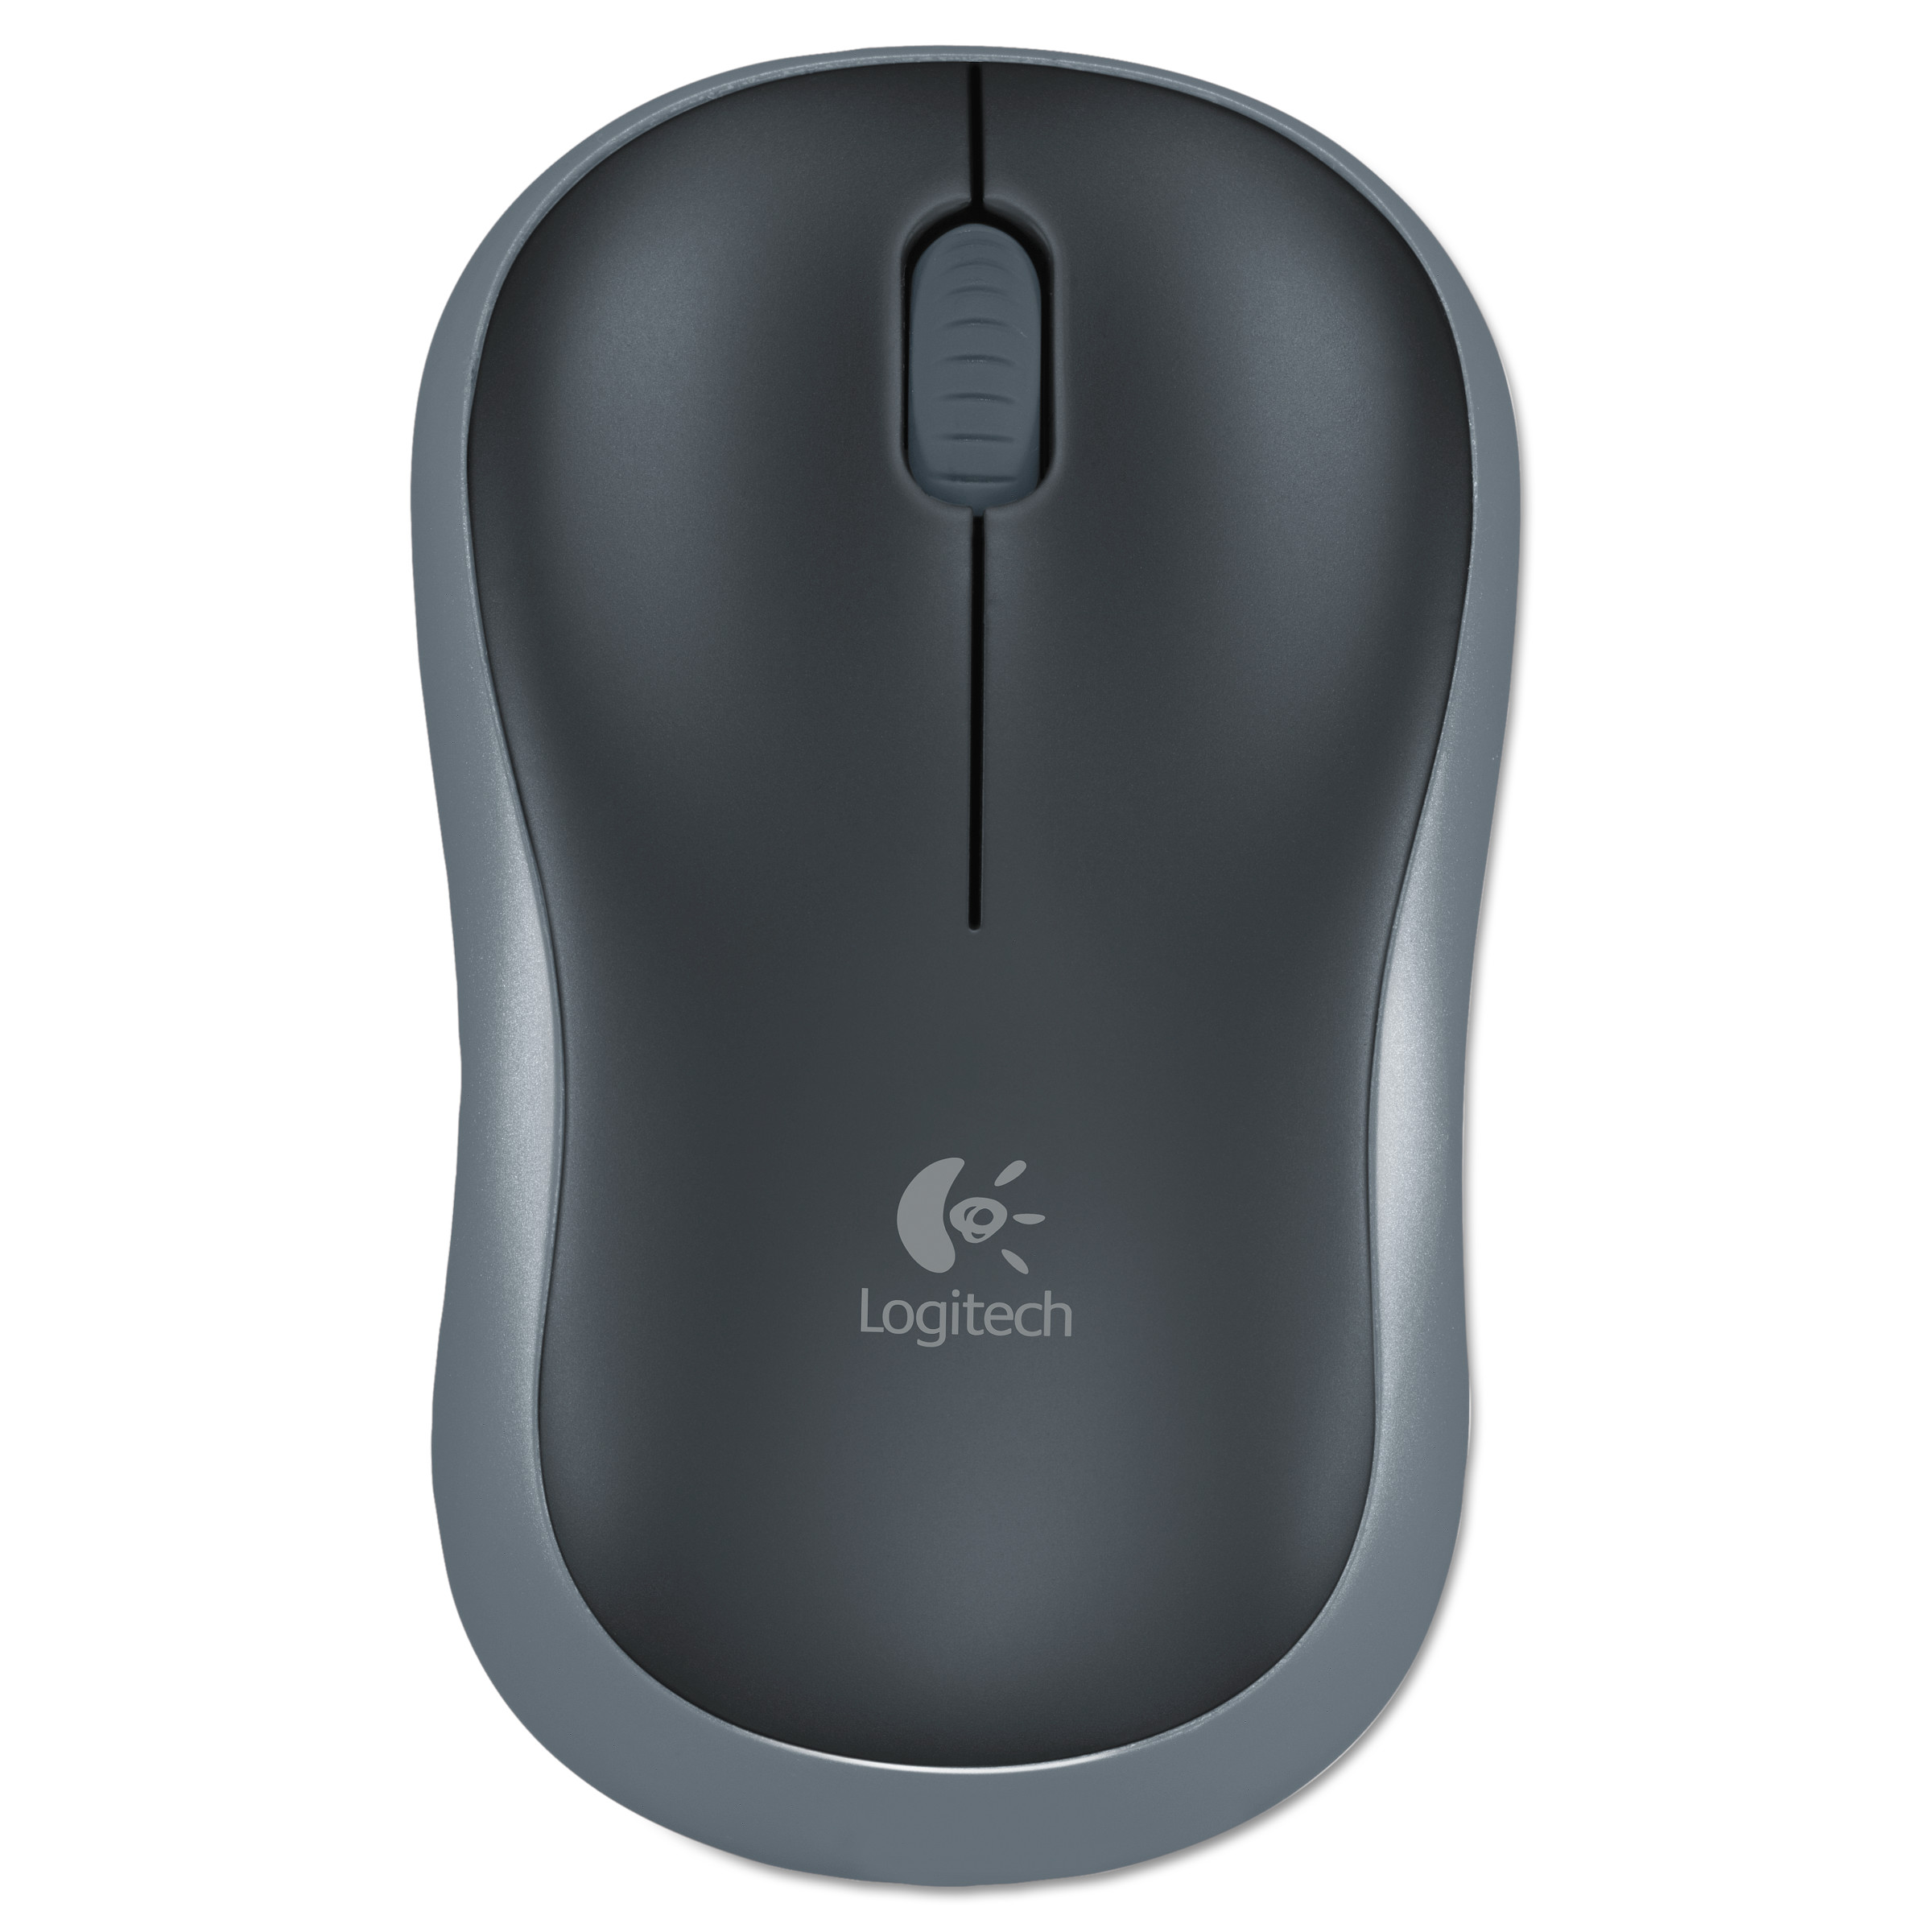 Logitech M185 Wireless Computer Mouse - image 1 of 4